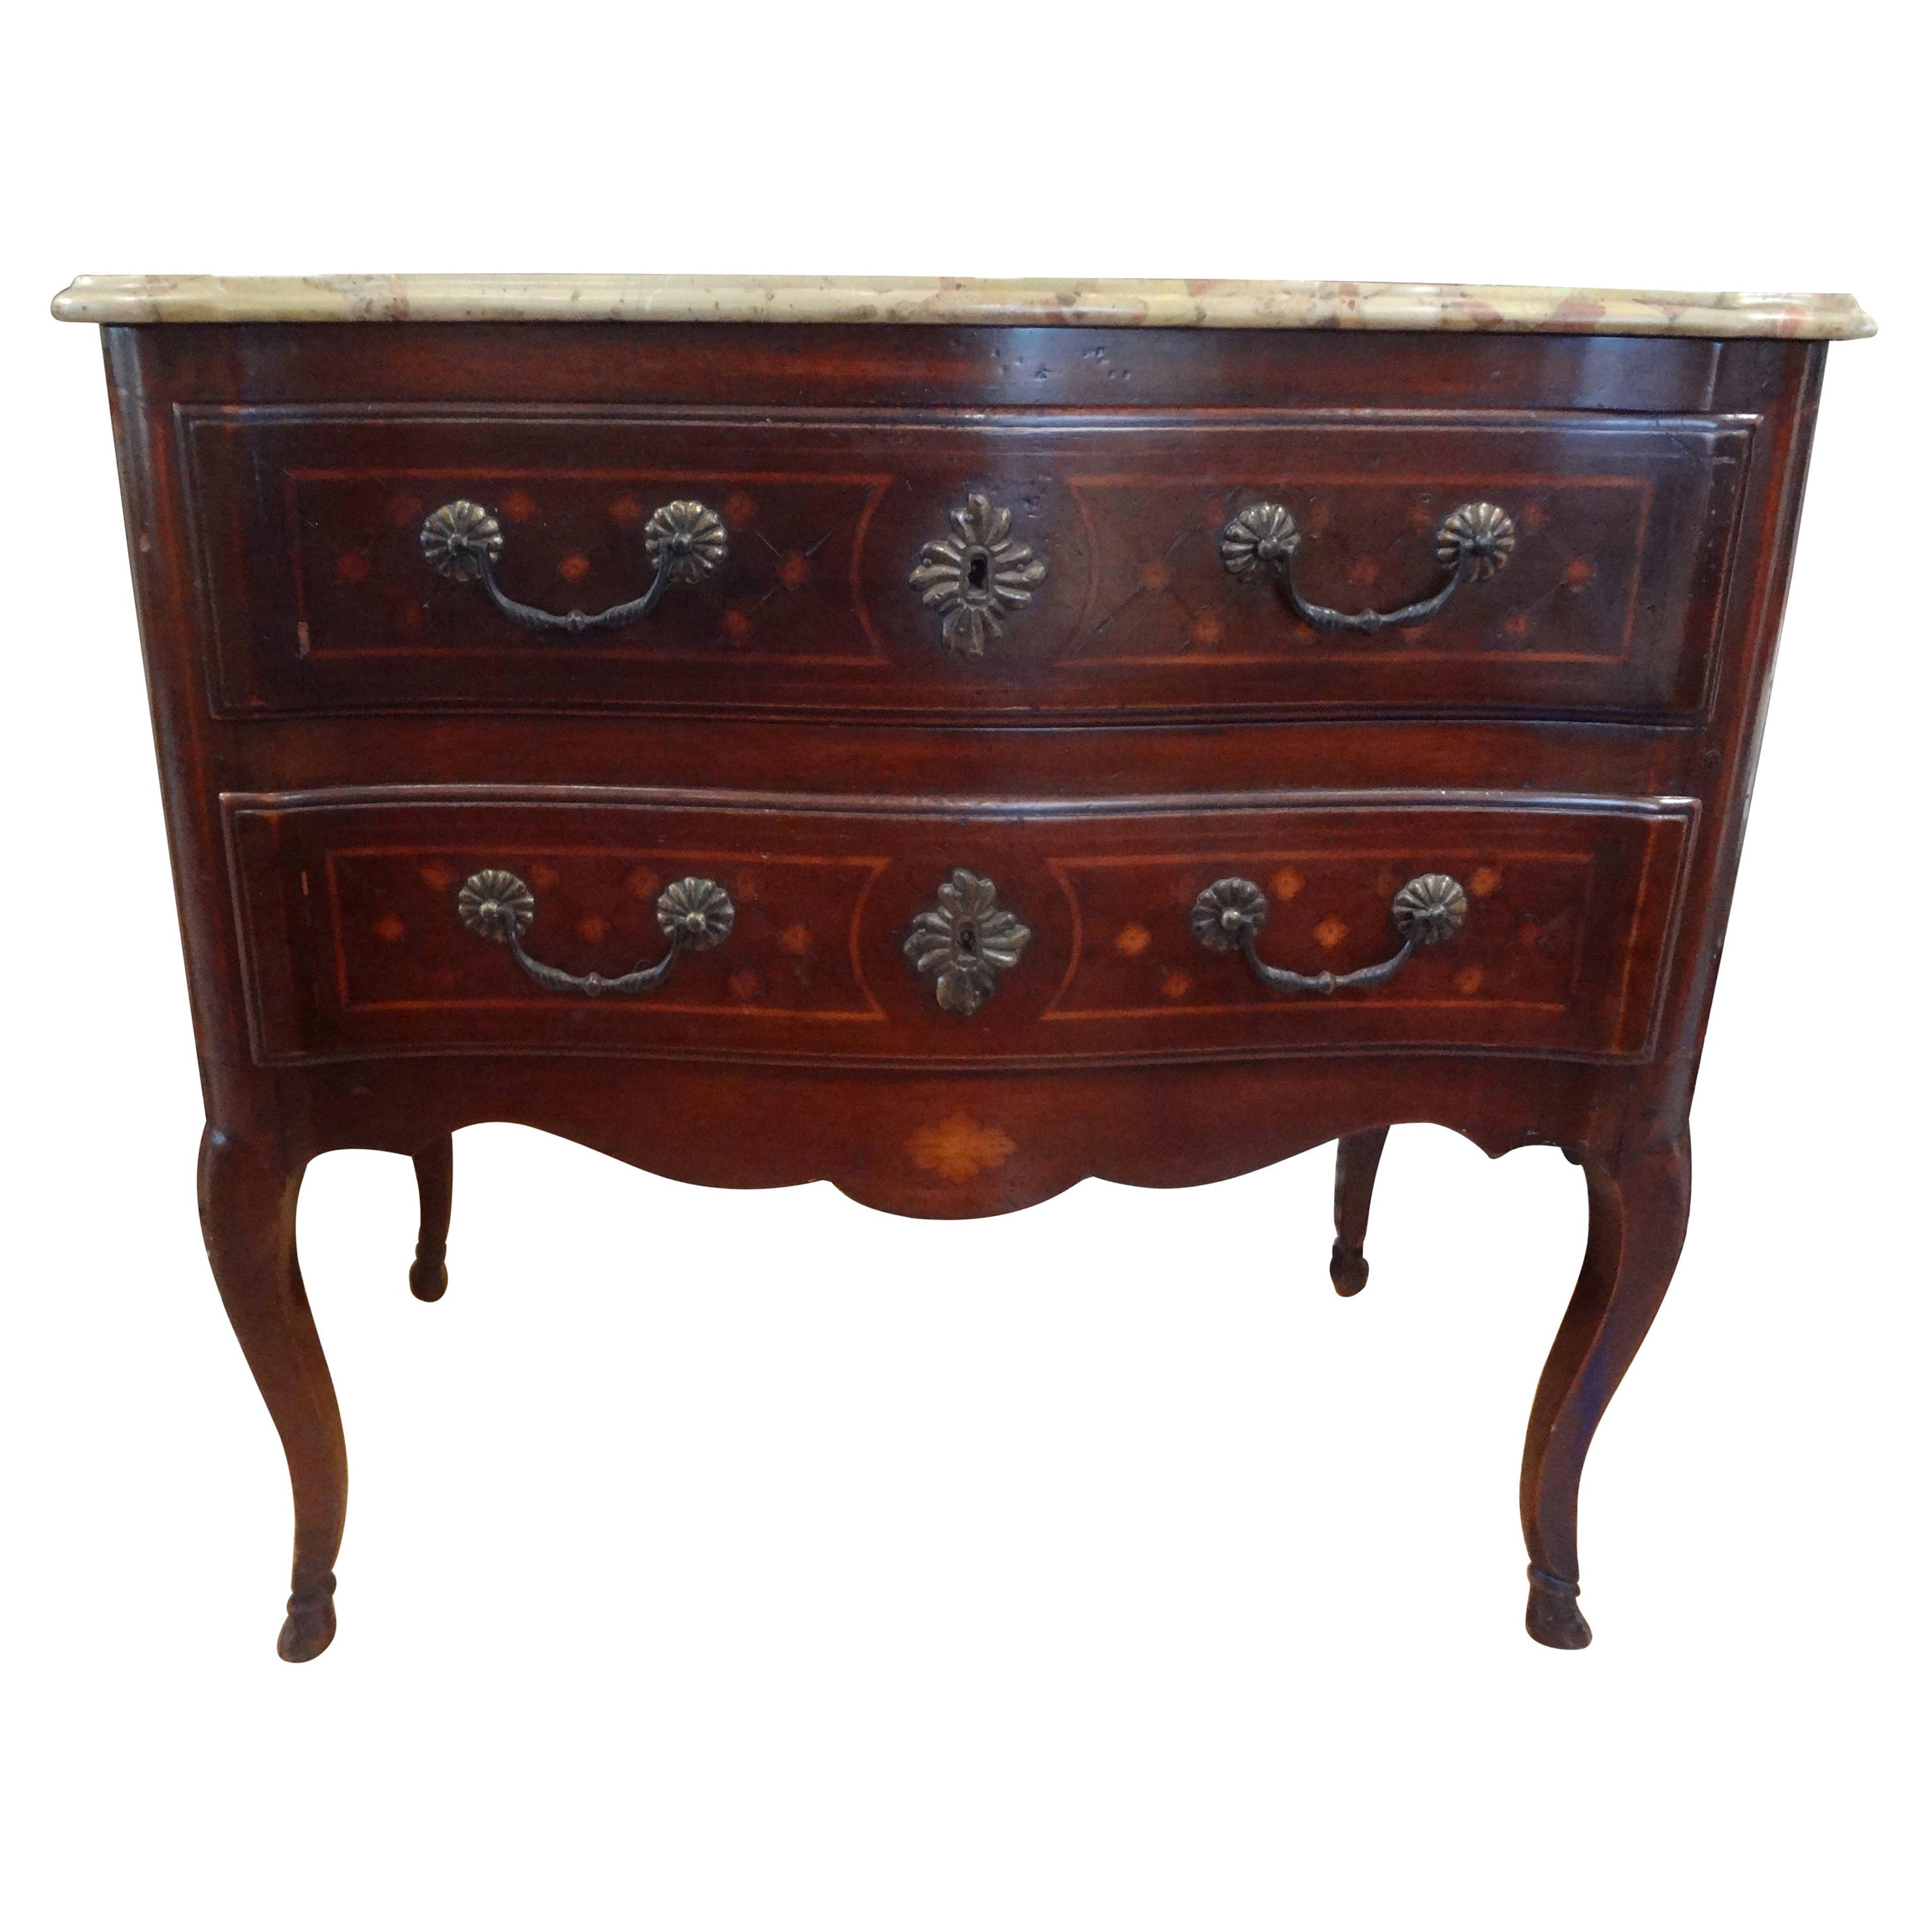 19th Century, French, Louis XV Style Commode